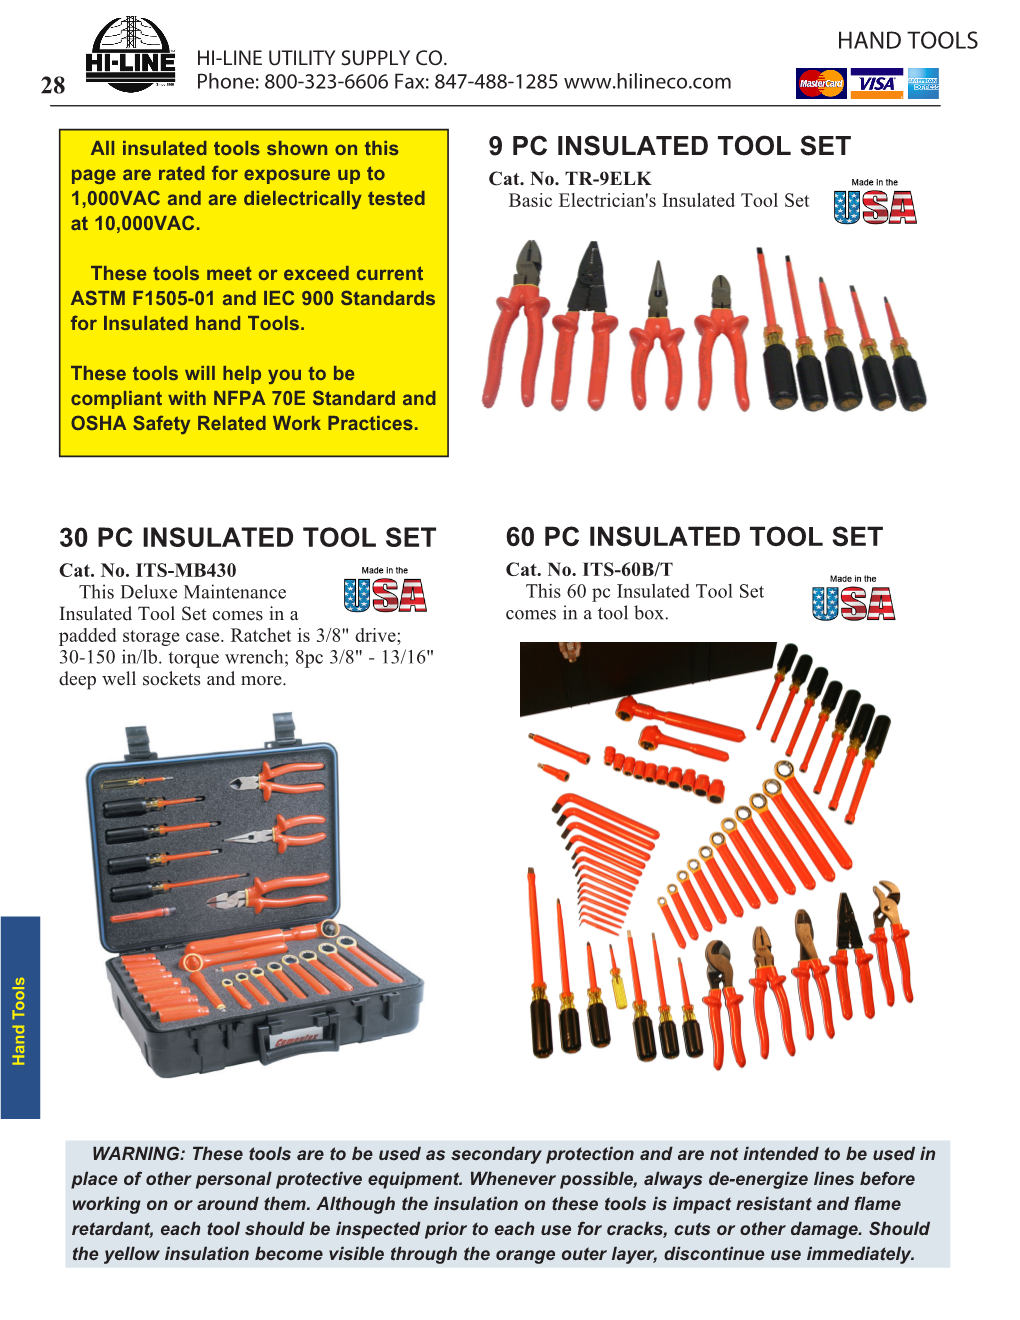 60 PC INSULATED TOOL SET Cat